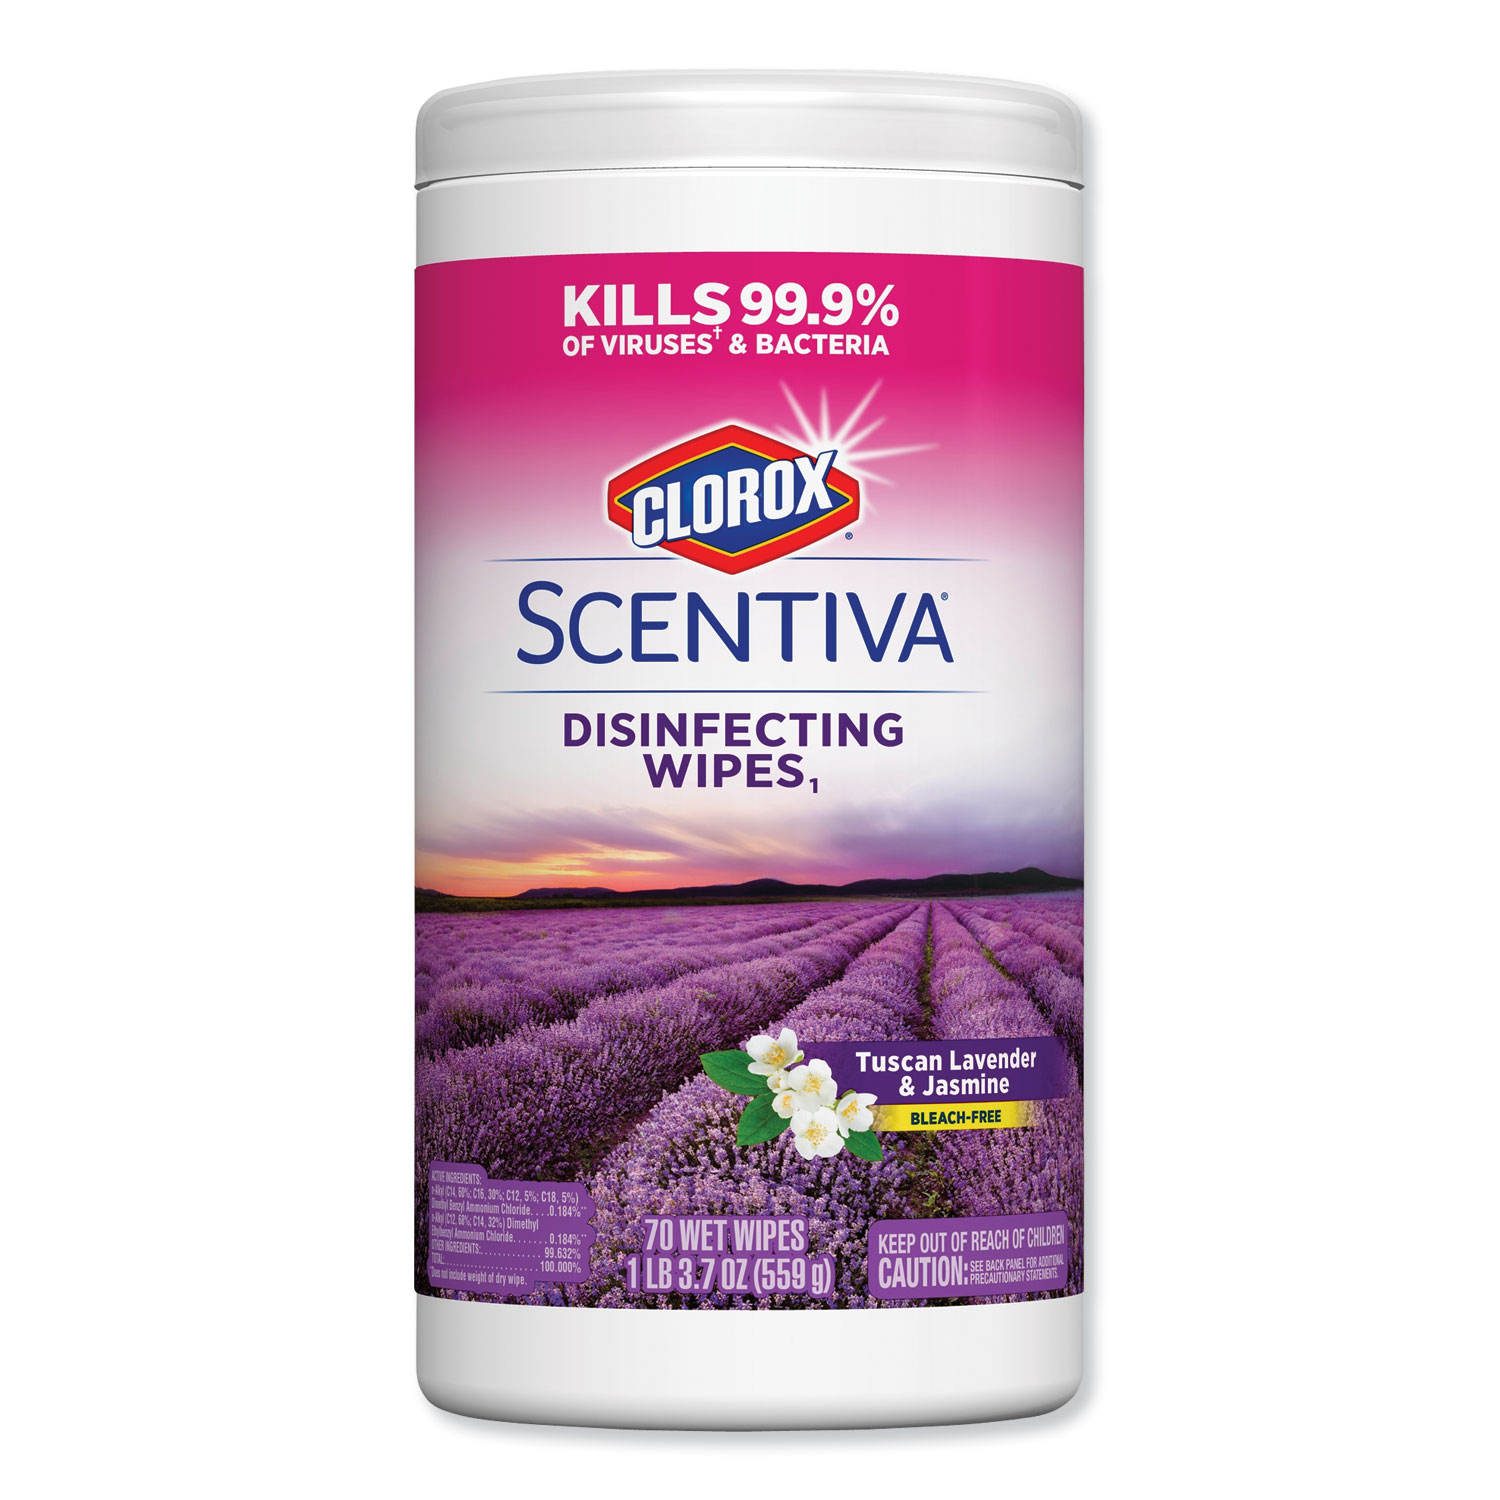  Clorox 31629EA Scentiva Disinfecting Wipes, White, Tuscan Lavender and Jasmine, 70/Canister (CLO31629EA) 